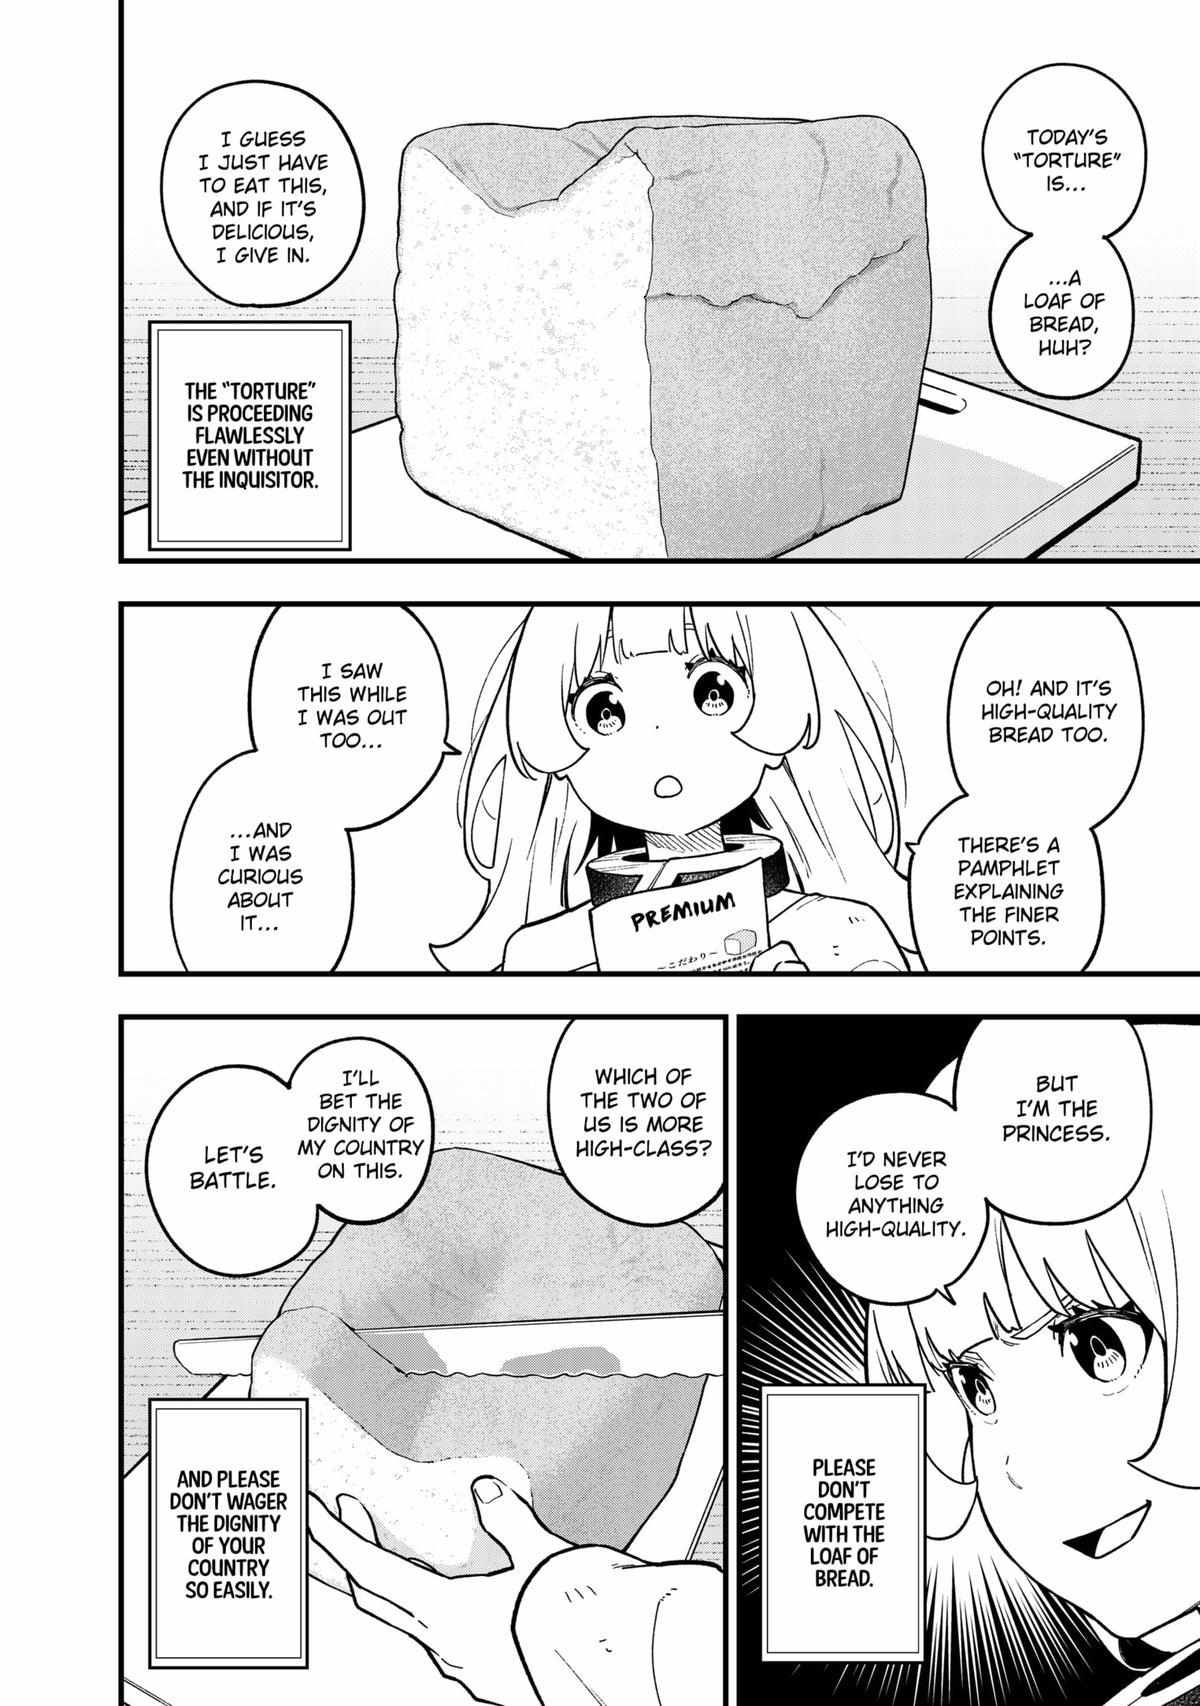 It's Time for "Interrogation", Princess! - chapter 200 - #5